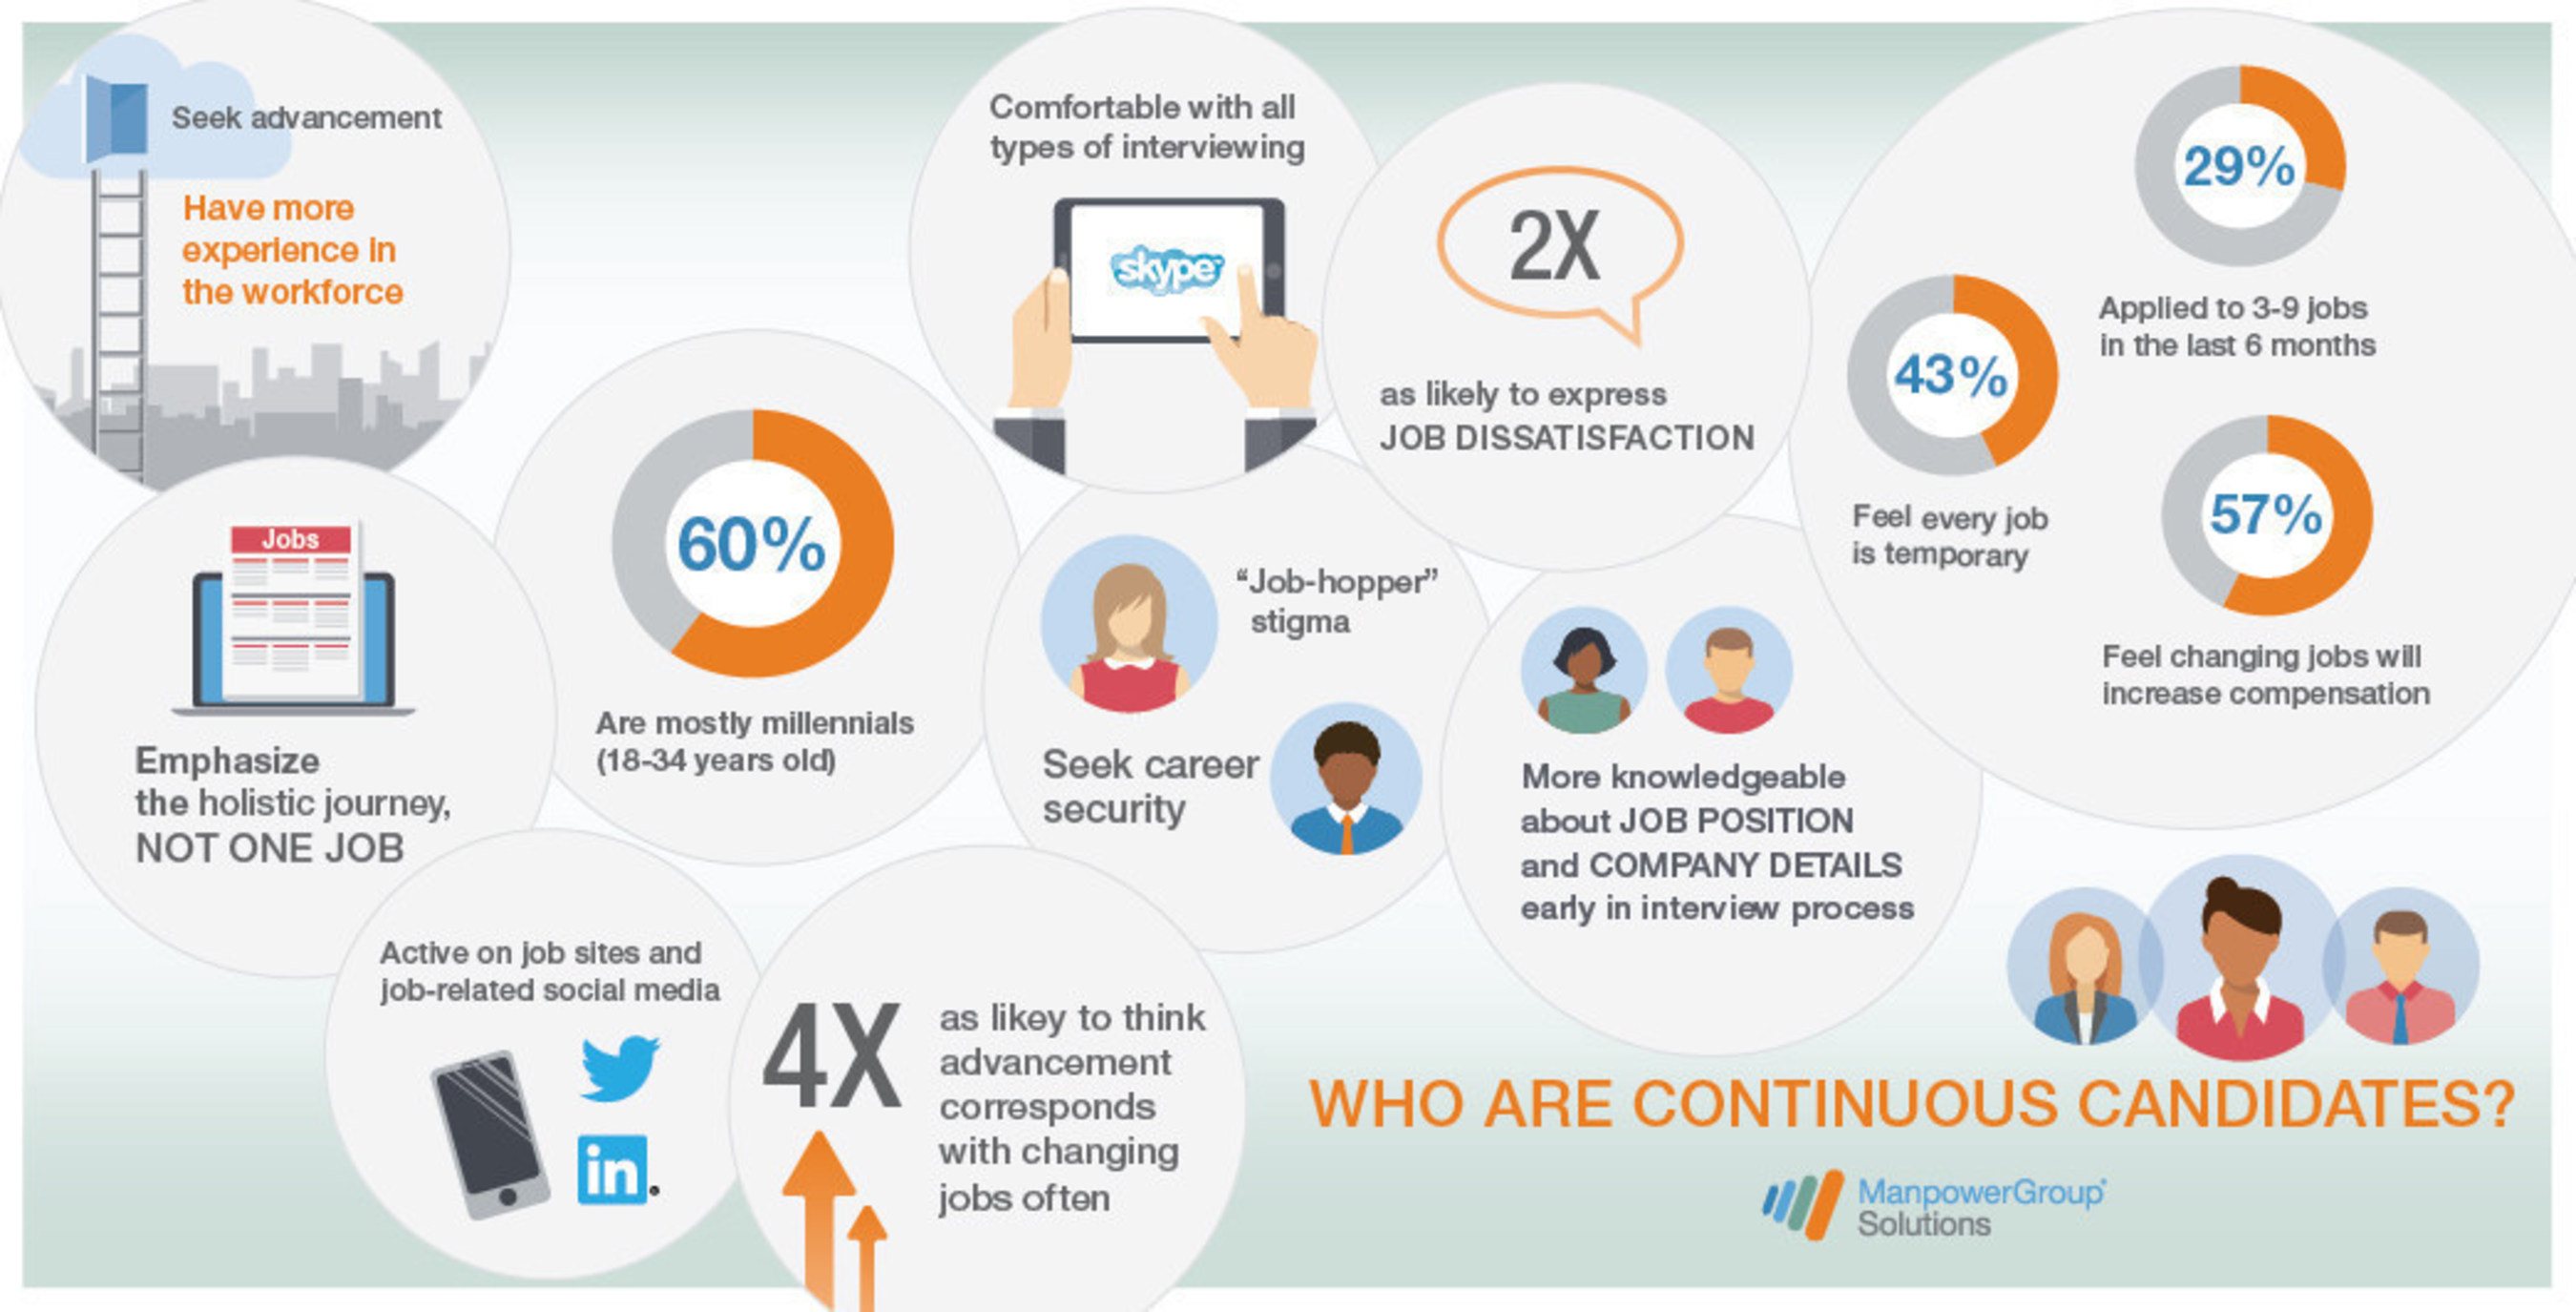 Known as "Continuous Candidates," more than one-third (37%) of employees across the globe are always looking for their next job opportunity, according to a global study of job seekers conducted by ManpowerGroup Solutions.